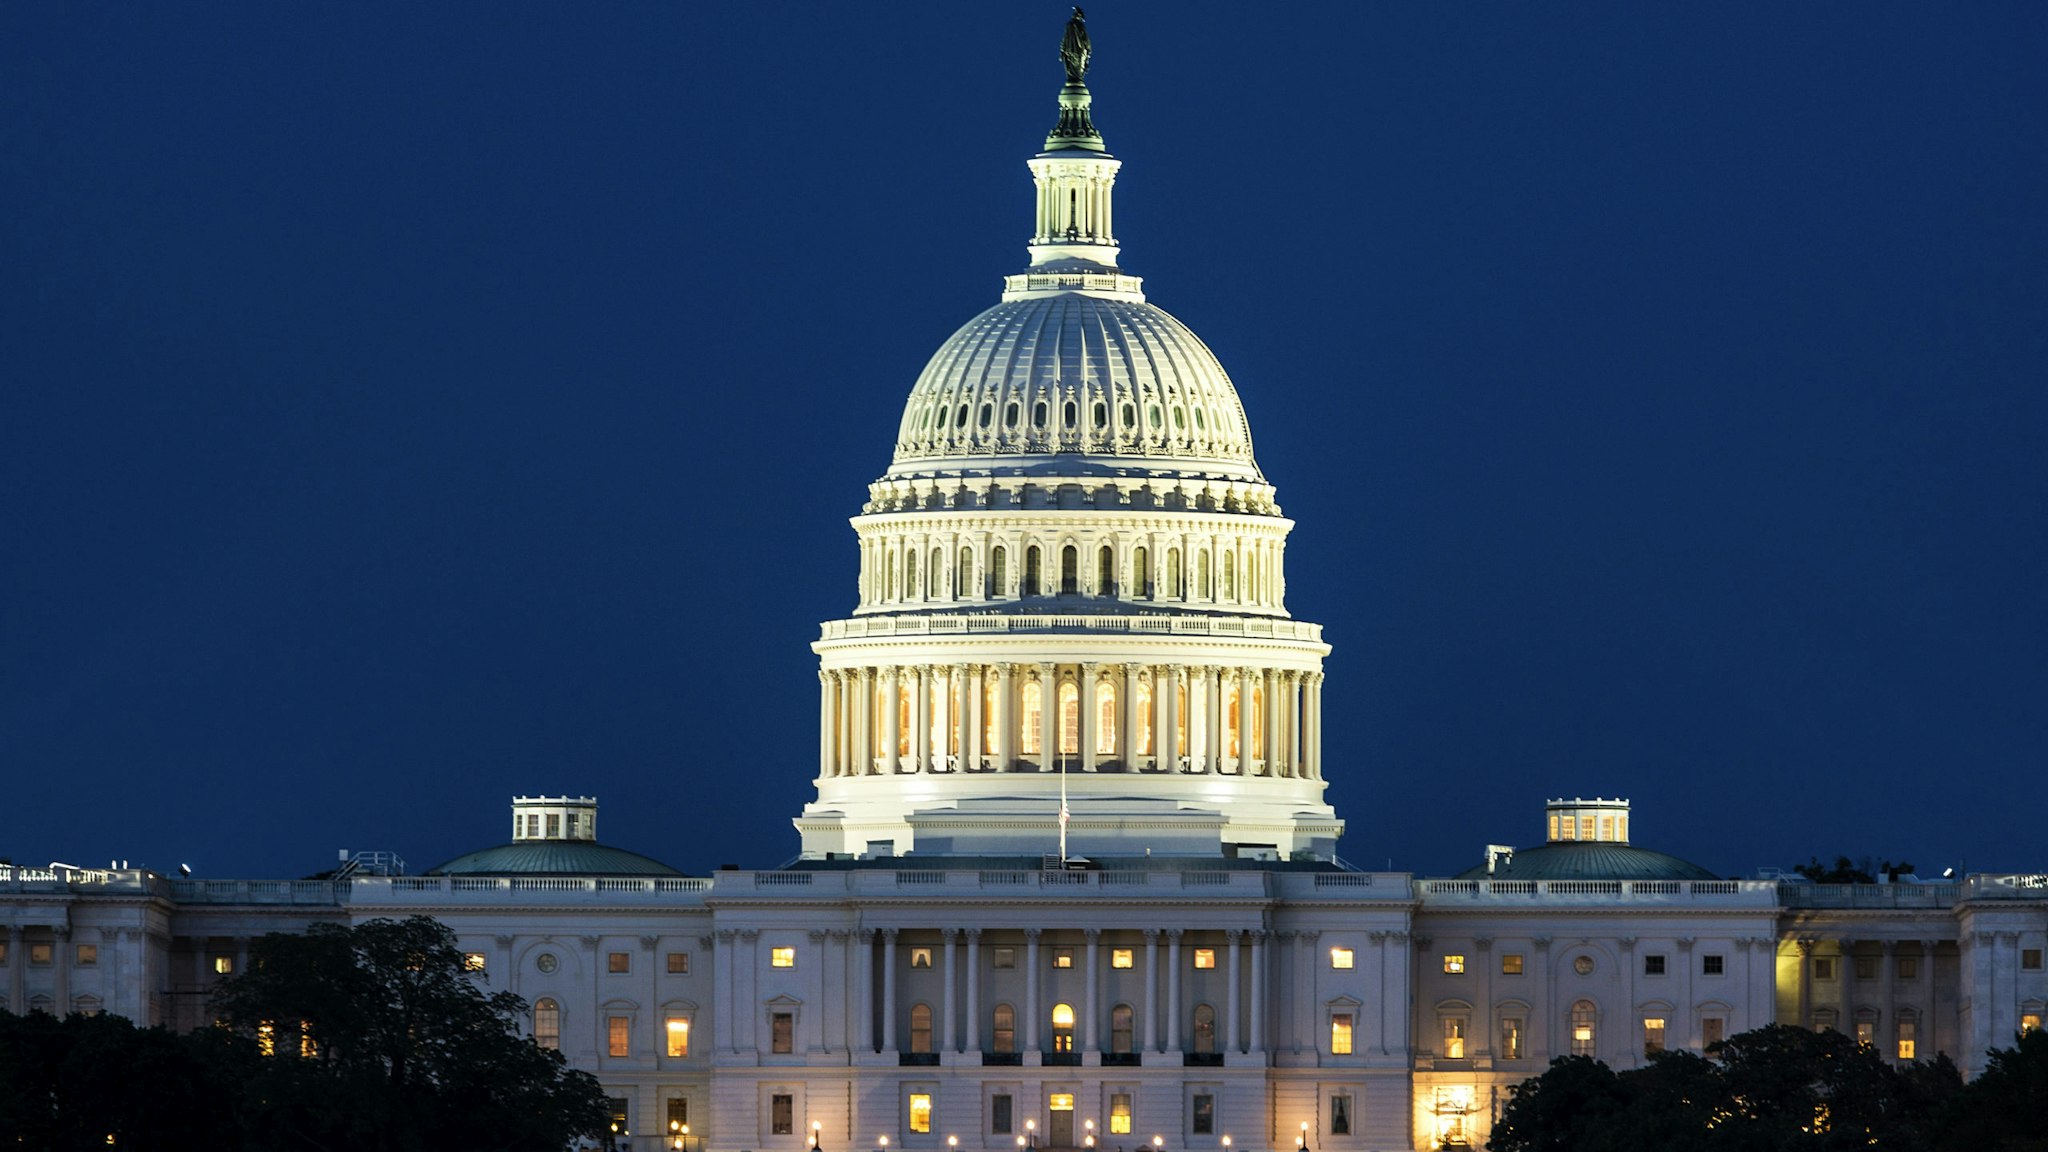 The United States Capitol Building at night.